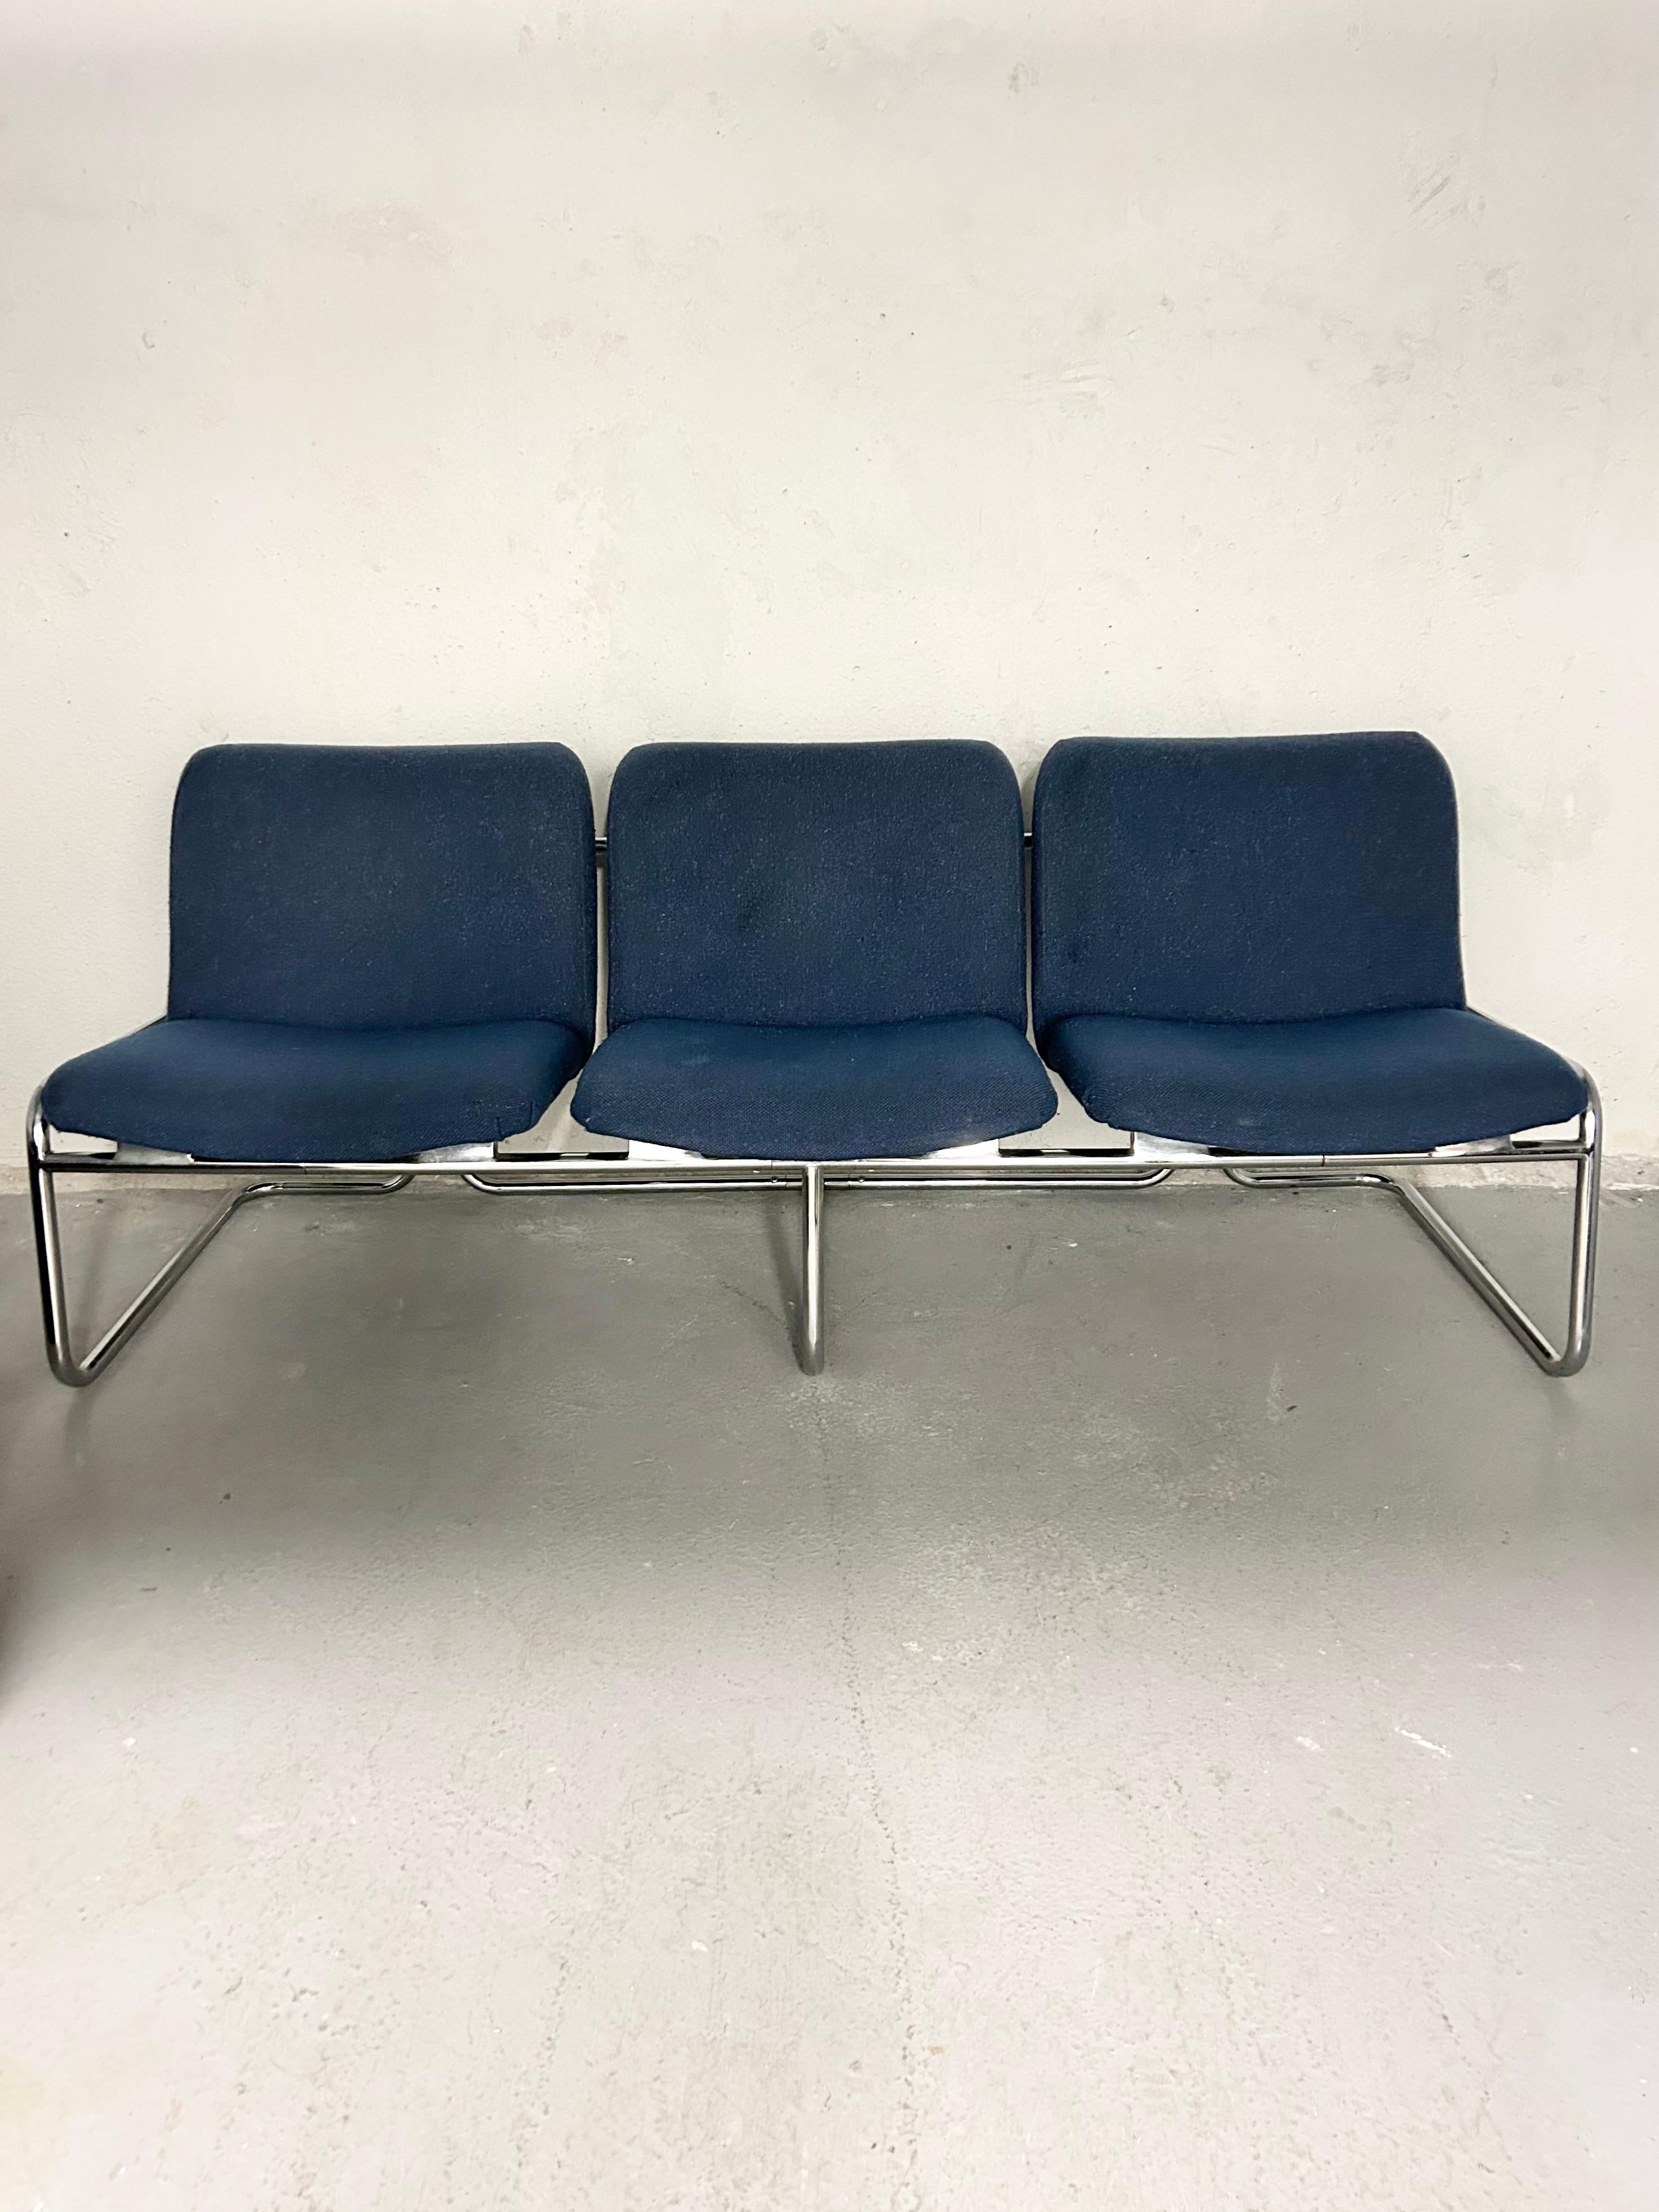 North American Vintage Chrome Sofa or Bench